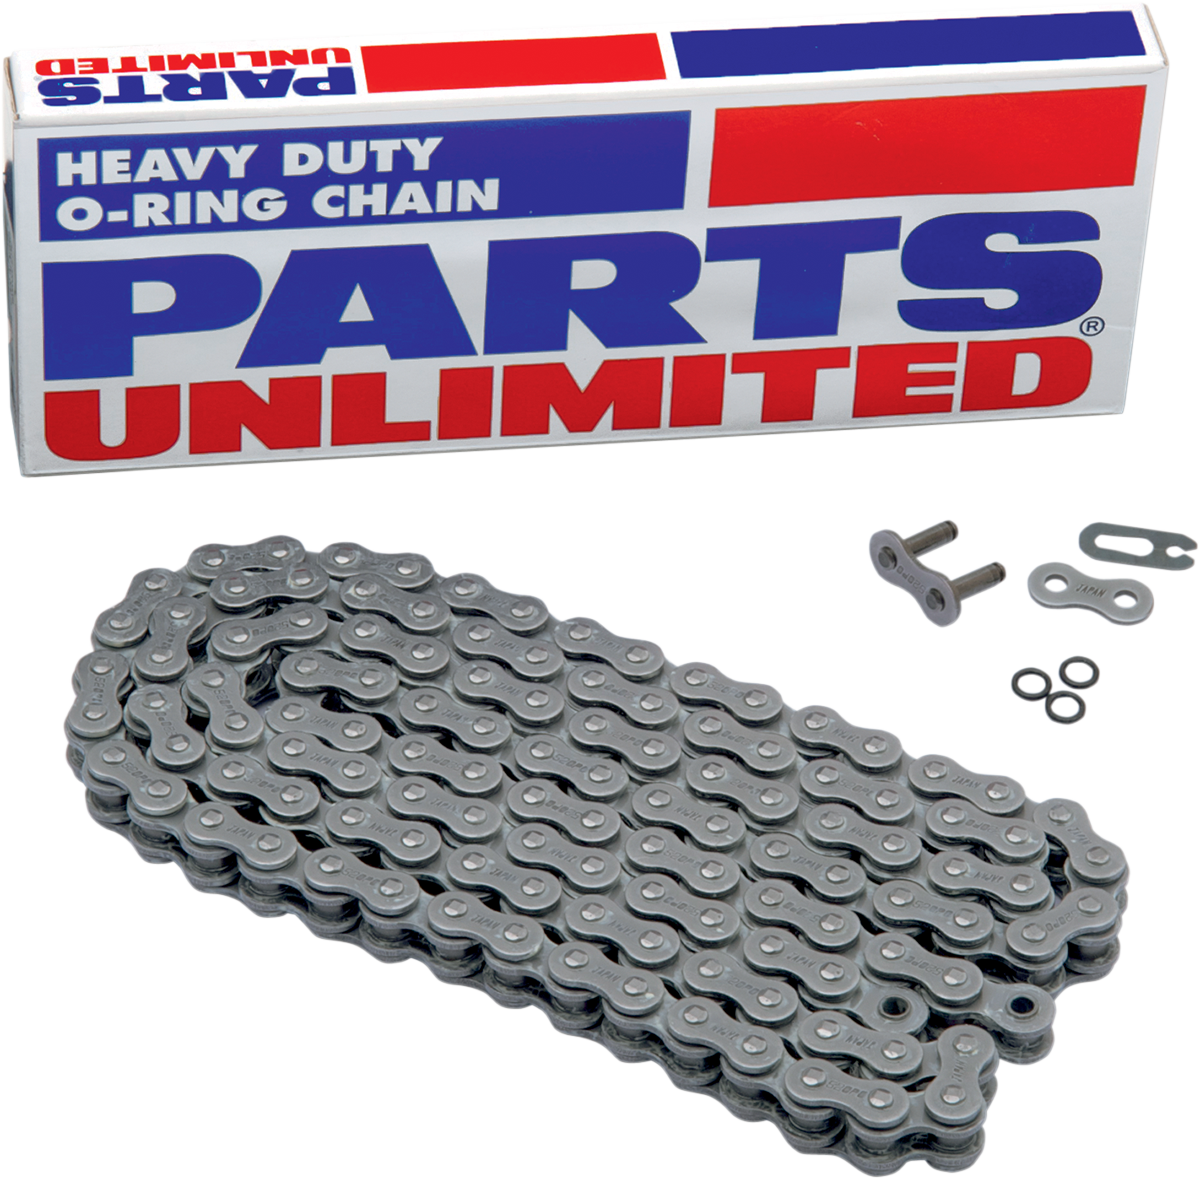 PARTS UNLIMITED-CHAIN MOTORCYCLE CHAIN CHAIN PU 530 O-RNG X 116L